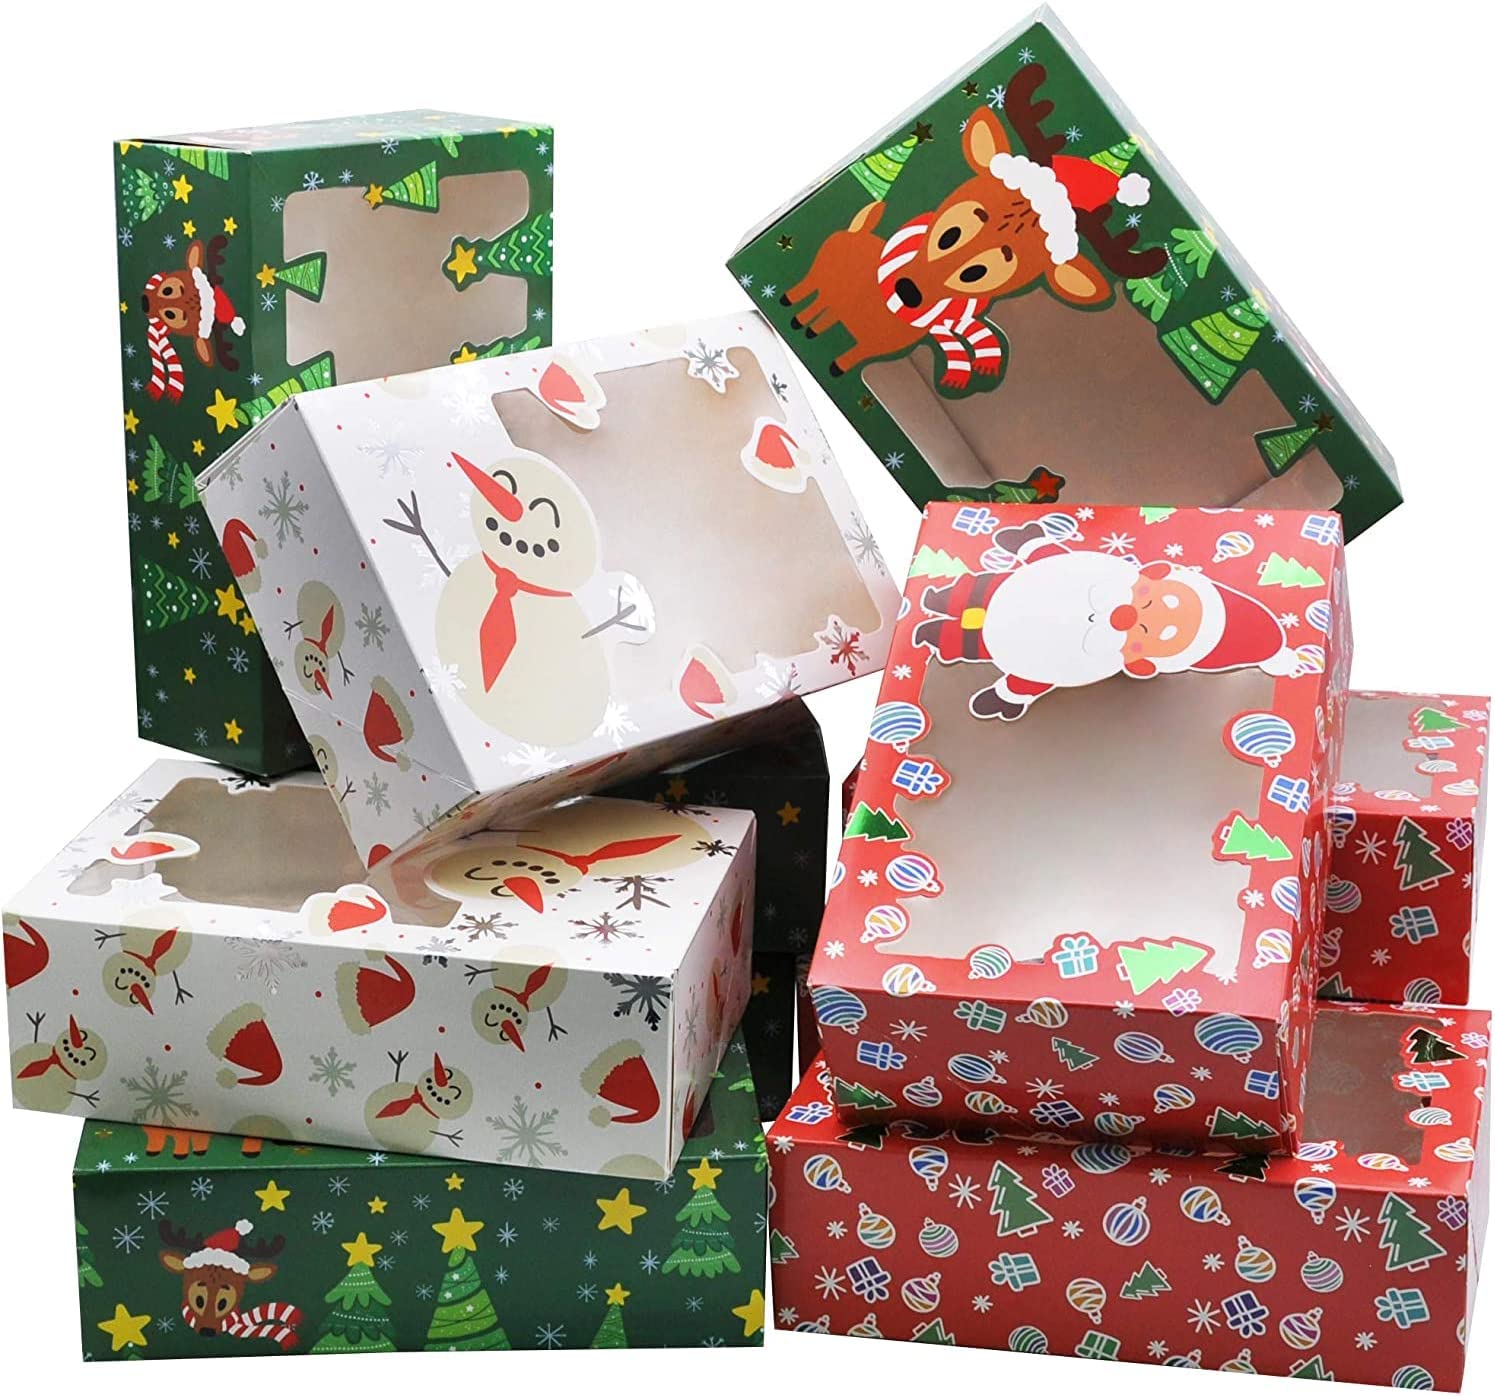 JOYIN 150 Sheets Christmas Tissue Paper Bulk 20x 20 Assorted Christmas  Gift Wrapping Tissue for Gift Bags DIY Crafts Party Decorations